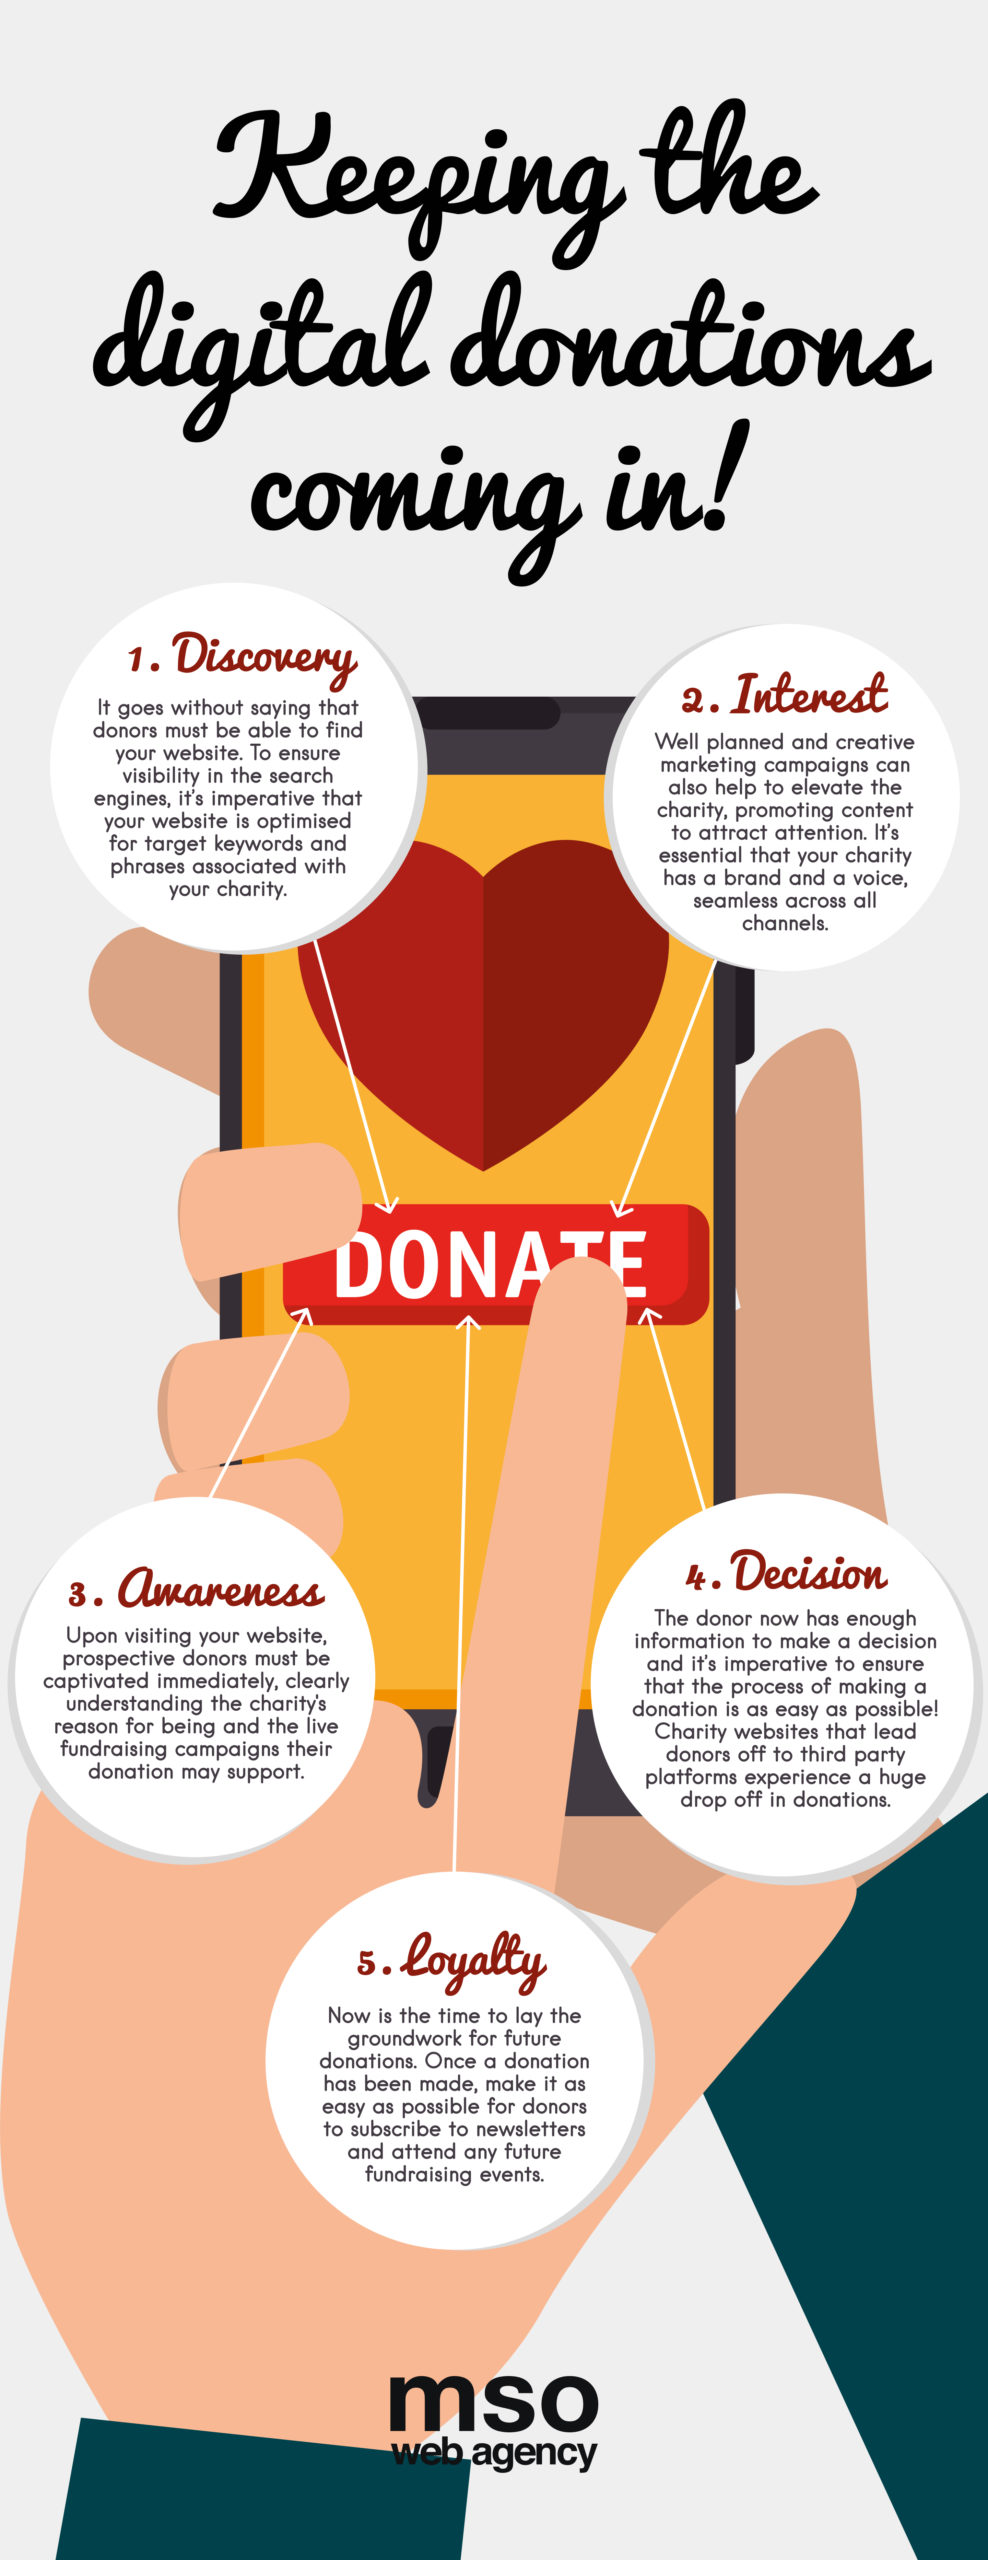 Outlines the key stages in the online donation experience. 